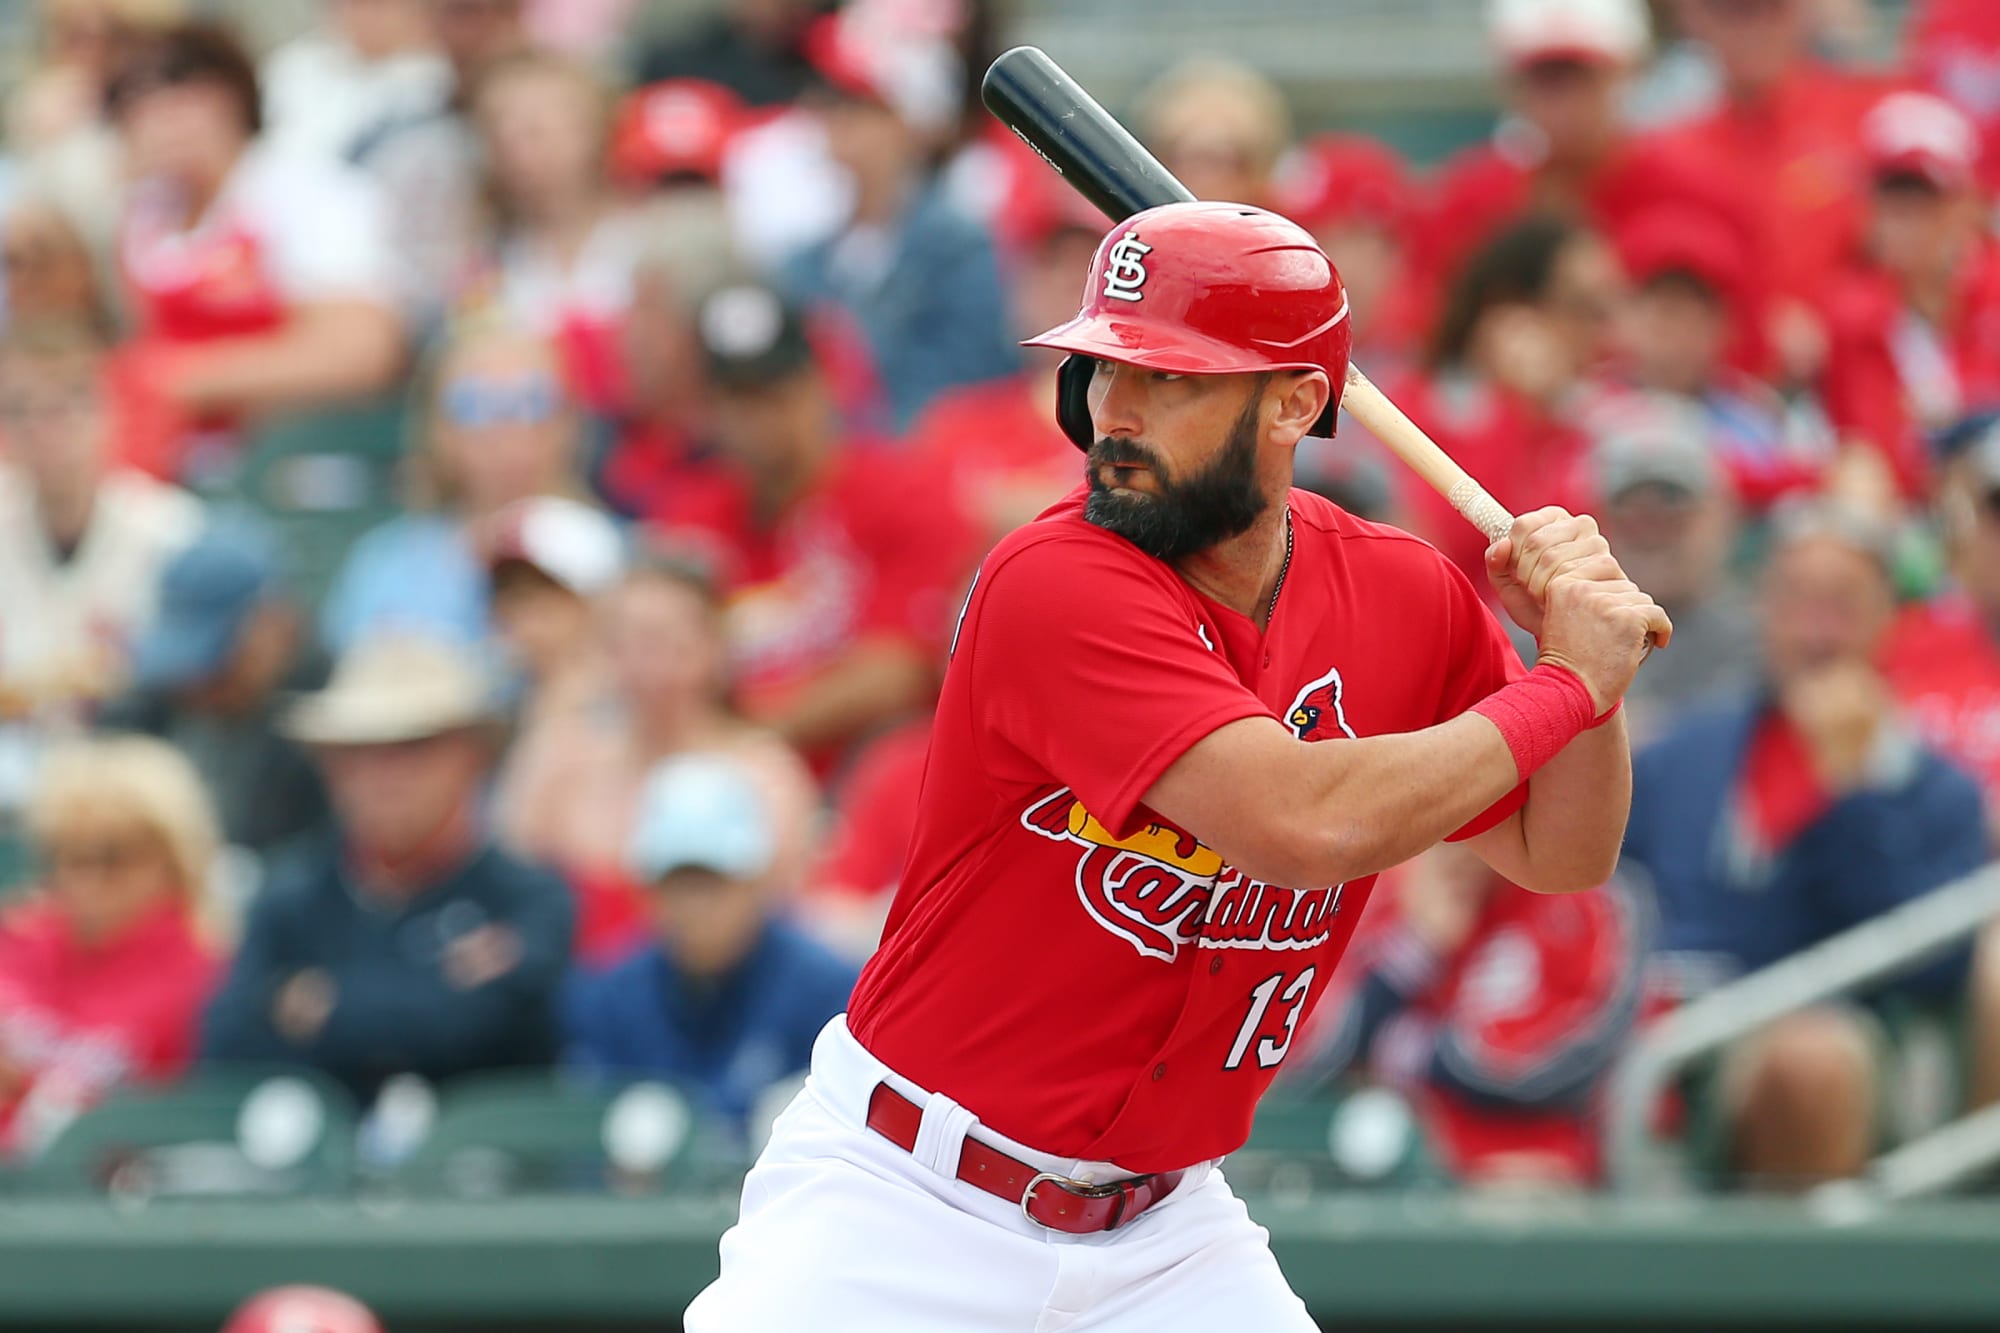 St. Louis Cardinals: Like it or not, the DH helps the team in 2020